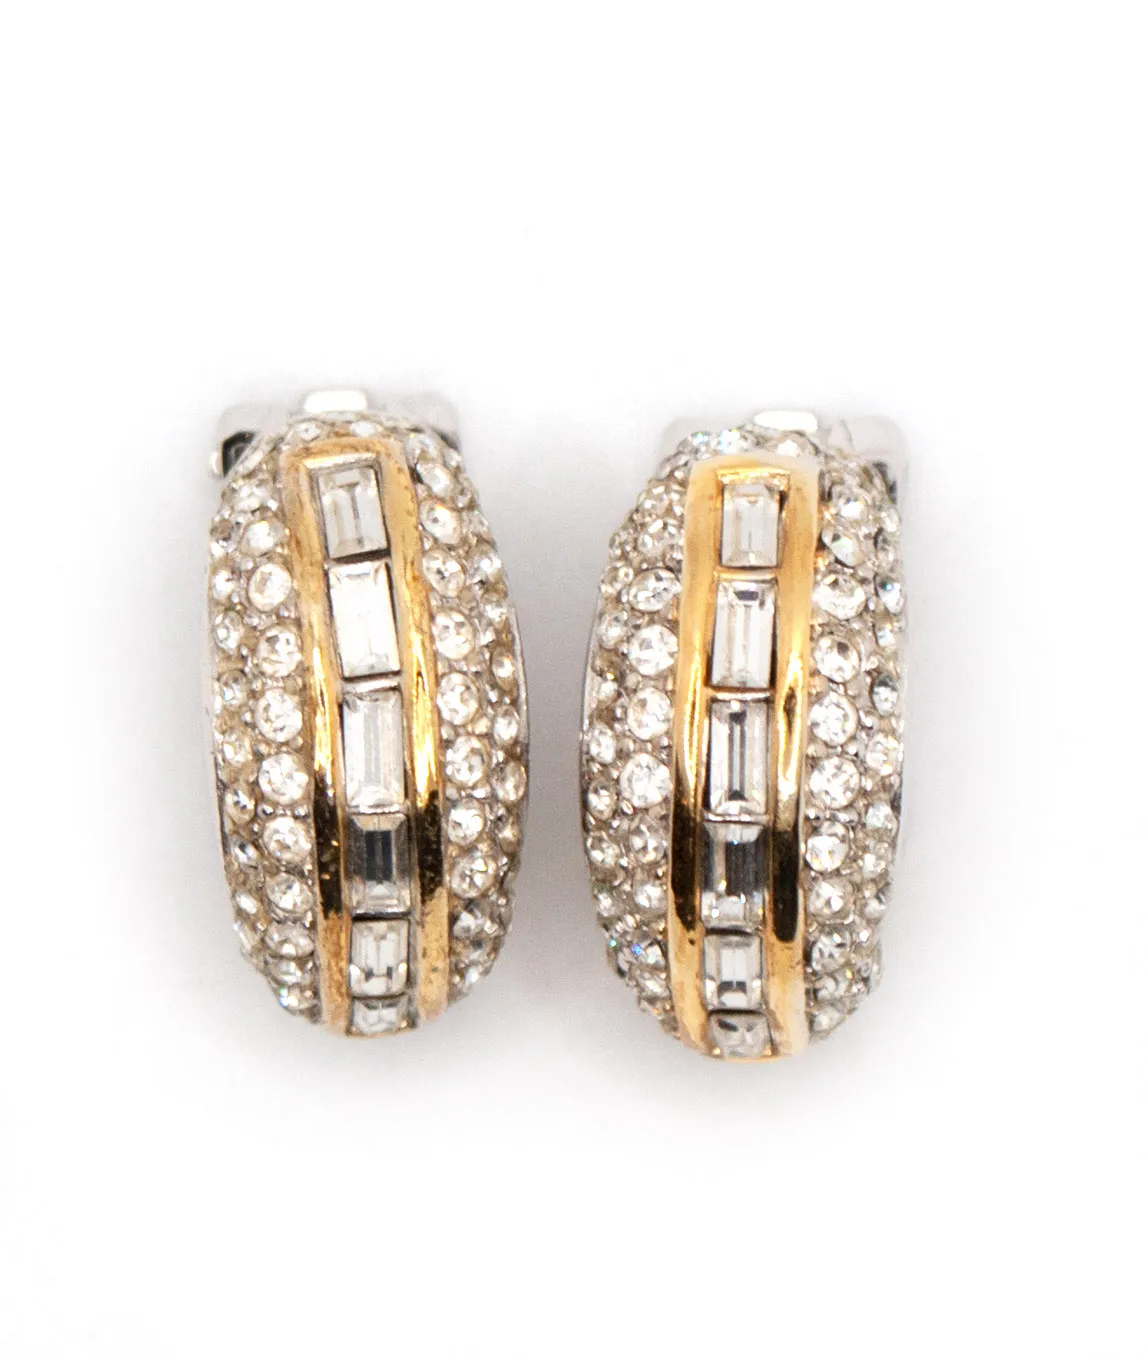 Vintage 1980s Christian Dior demi hoop earrings with rhinestones and gold-tone and silver-tone metal